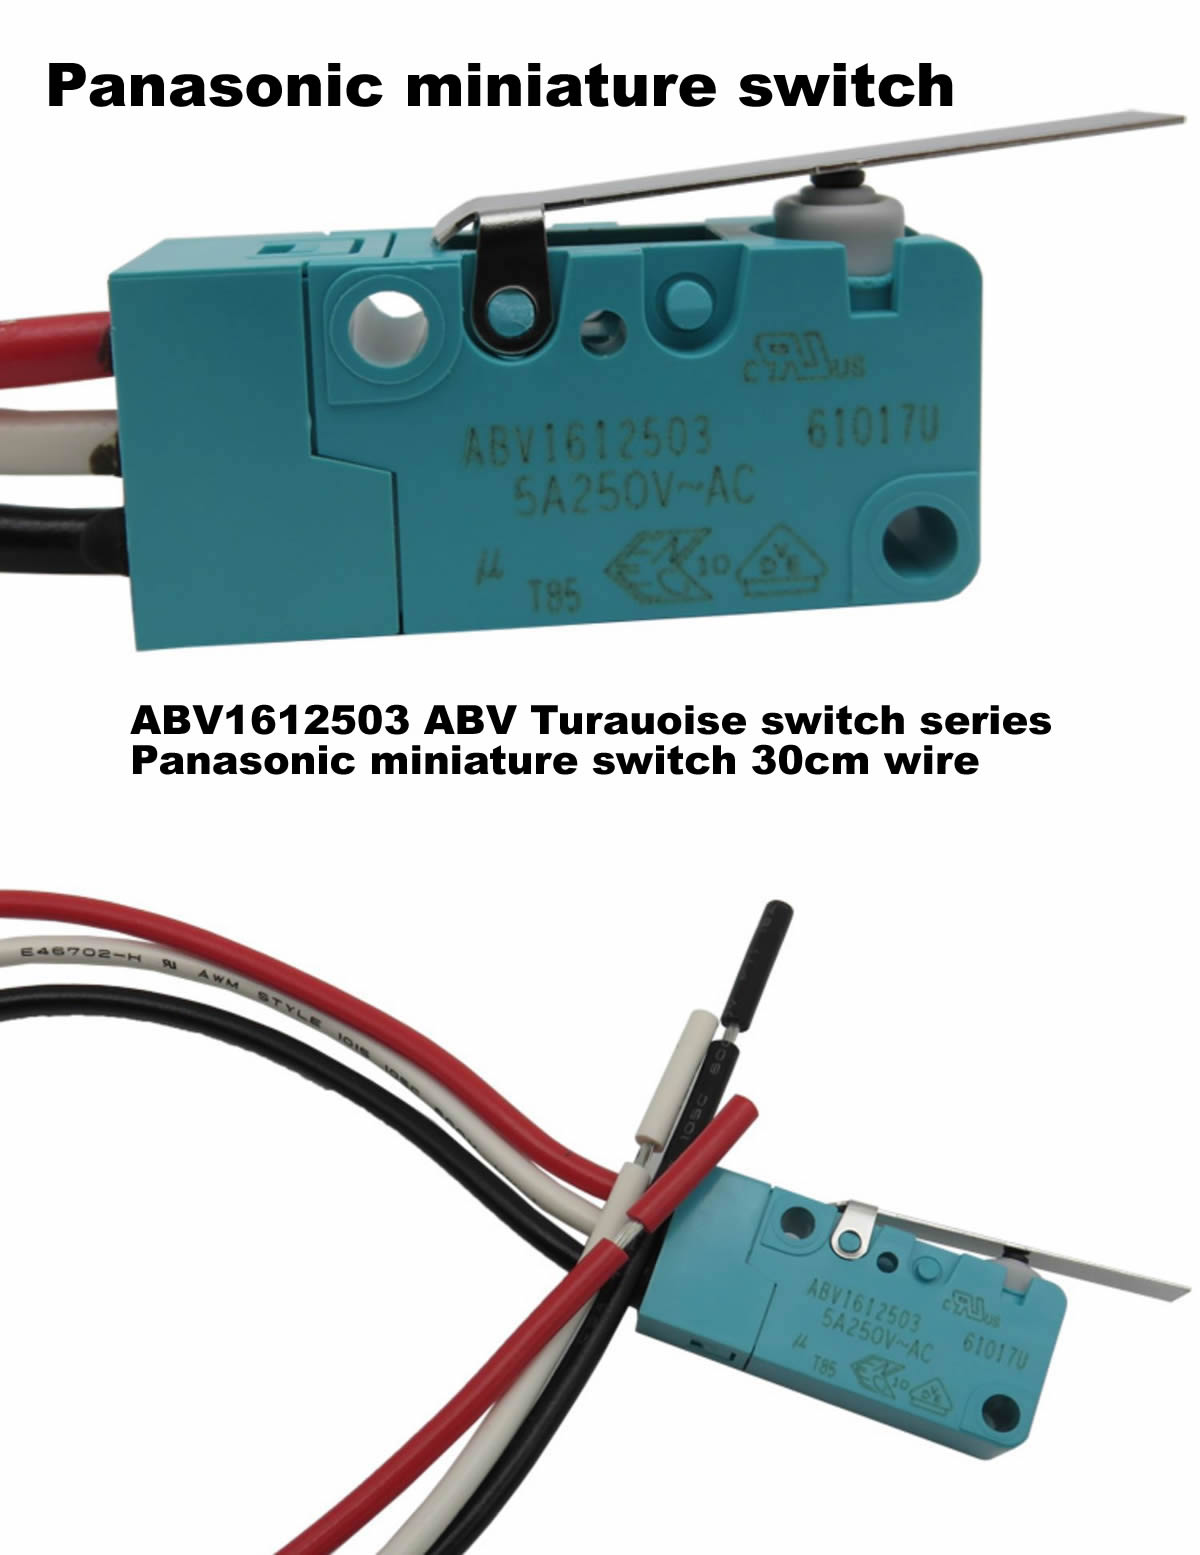 ABV1612503 ABV Turauoise switch series Panasonic miniature switch 30cm wire